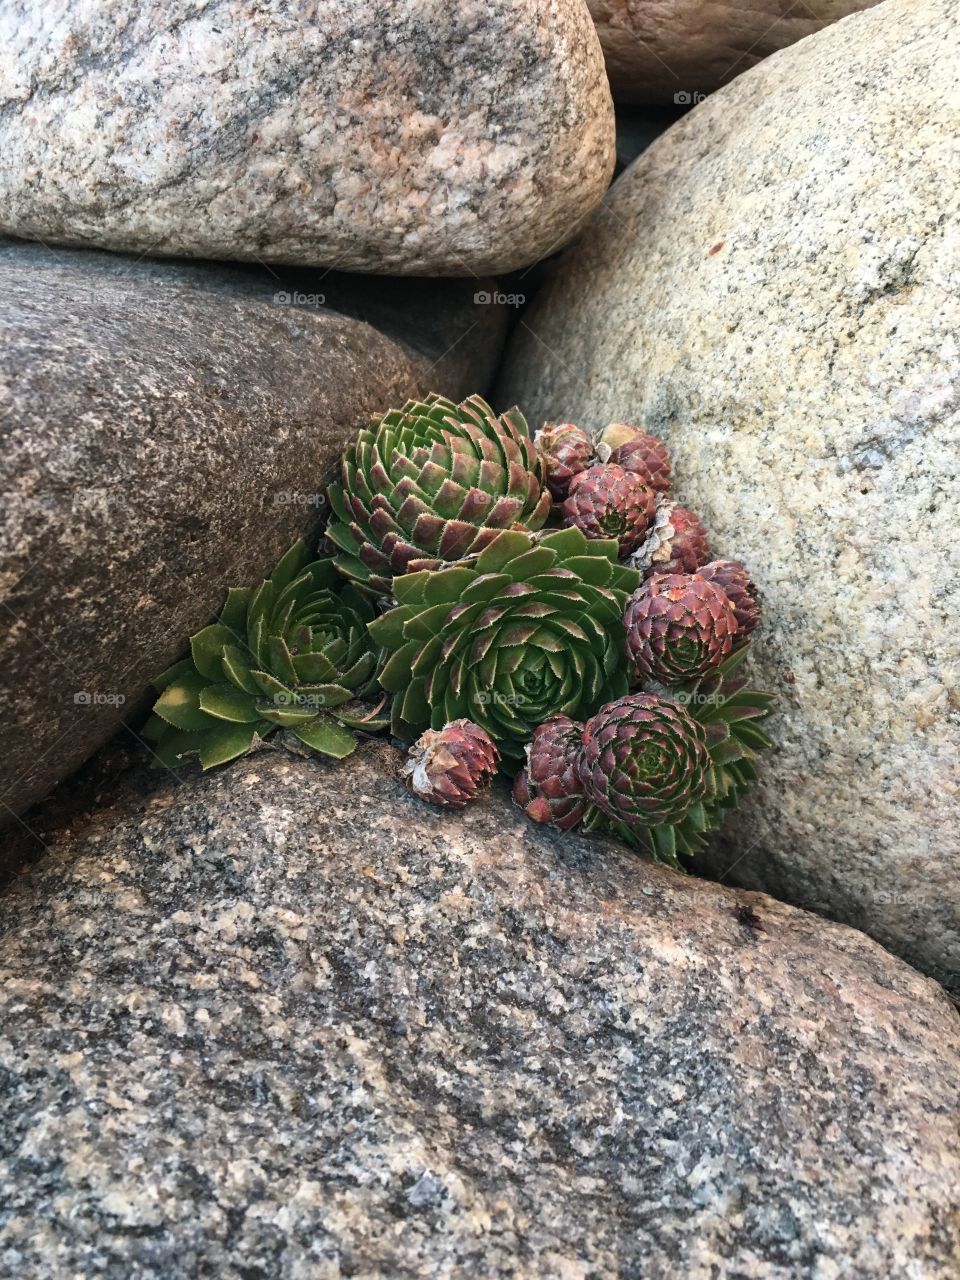 Hens and Chicks Group